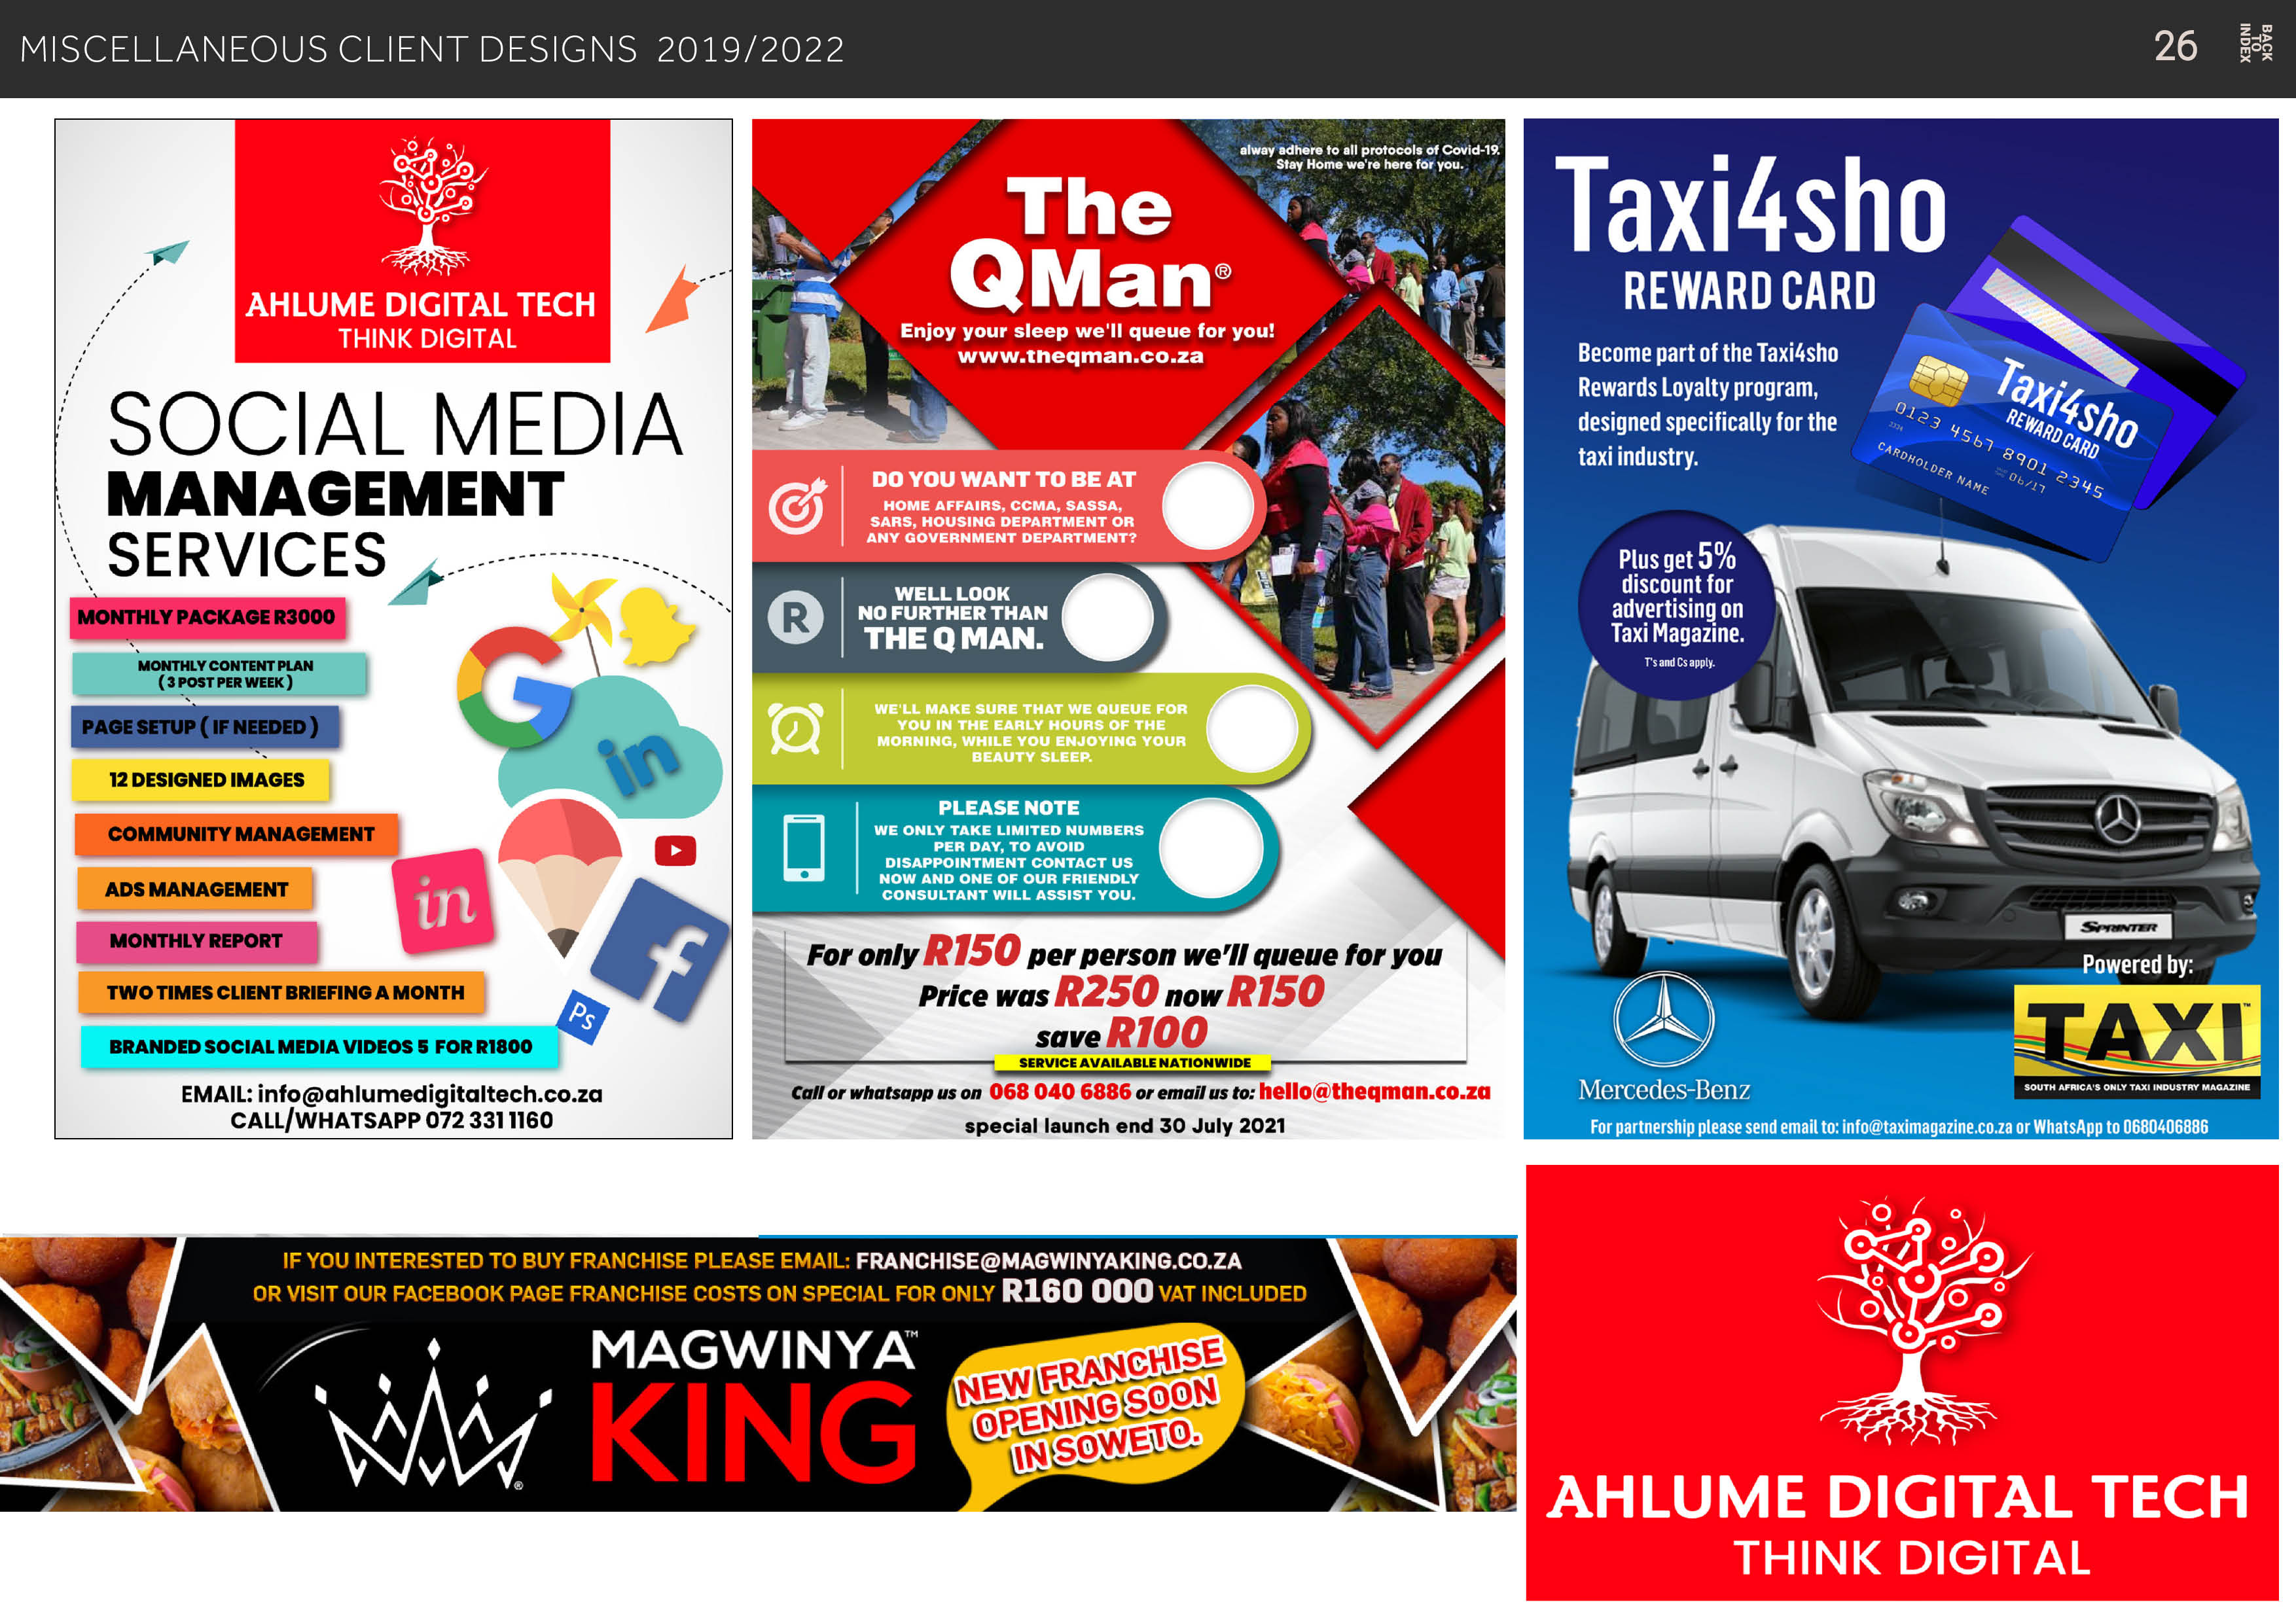 MISCELLANEOUS CLIENT DESIGNS 2019/2022

En

AHLUME DIGITAL TECH
THINK DIGITAL

SOCIAL MEDIA

~ MANAGEMENT
- SERVICES
EE,

MONTHLY CONTENT PLAN
(3POSTPERWEEK)

EE
|i J

TWO TIMES CLIENT BRIEFING A MONTH o
BRANDED SOCIAL MEDIA VIDEOS § FOR R1800

EMAIL: info@ahlumedigitaltech.co.za
CALL/WHATSAPP 072 3311160

Ye

alway adhere to all protocols of Covid-19.
Stay Home we're here for you.

+ ~ The !

ve

Enjoy your sleep we'll queue for you!
www.thegman.co.za

Toy,

i= VET §
¥ ~~
en)

DO YOU WANT TO BE AT
LL NL ENT I TRE TET

, HOUSING DEPARTMENT OR

ANY GOVERNMENT DEPARTMENT?

LoS Ee
Q NO FURTHER THAN

THE Q MAN.

PLEASE NOTE
WE ONLY TAKE LIMITED NUMBERS
PER DAY, TO AVOID
DISAPPOINTMENT CONTACT US
NOW AND ONE OF OUR FRIENDLY
CONSULTANT WILL ASSIST YOU.

For only R150 per person we'll queue for you
price was R250 now R150
save R100

SERVICE AVAILABLE NATIONWIDE mm
Call or whatsapp us on 068 040 6886 or email us to: hello@theqgman.co.za
special launch end 30 July 2021

IF YOU INTERESTED TO BUY FRANCHISE PLEASE EMAIL: FRANCHISE@MAGWINYAKING.CO.ZA
OR VISIT OUR FACEBOOK PAGE FRANCHISE COSTS ON SPECIAL FOR ONLY R160 000 var INcLUDED

EJ
pL
R=

Taxi4sho

REWARD CARD

Become part of the Taxi4sho

Rewards Loyalty program, Son
designed specifically for the
taxi industry.

ONES
5 N ys
[
SI a

»
N Gn

90,

o
y SL

Plus get 5%
discount for
advertising on

Taxi Magazine.
pr
—f  w—
A

| ETRY
5
= Q.-—

w— ©

Mercedes-Benz
For partnership please send email to: info@taximagazine.co.za or WhatsApp to 0680406886

—

Powered by:

AHLUME DIGITAL TECH
THINK DIGITAL